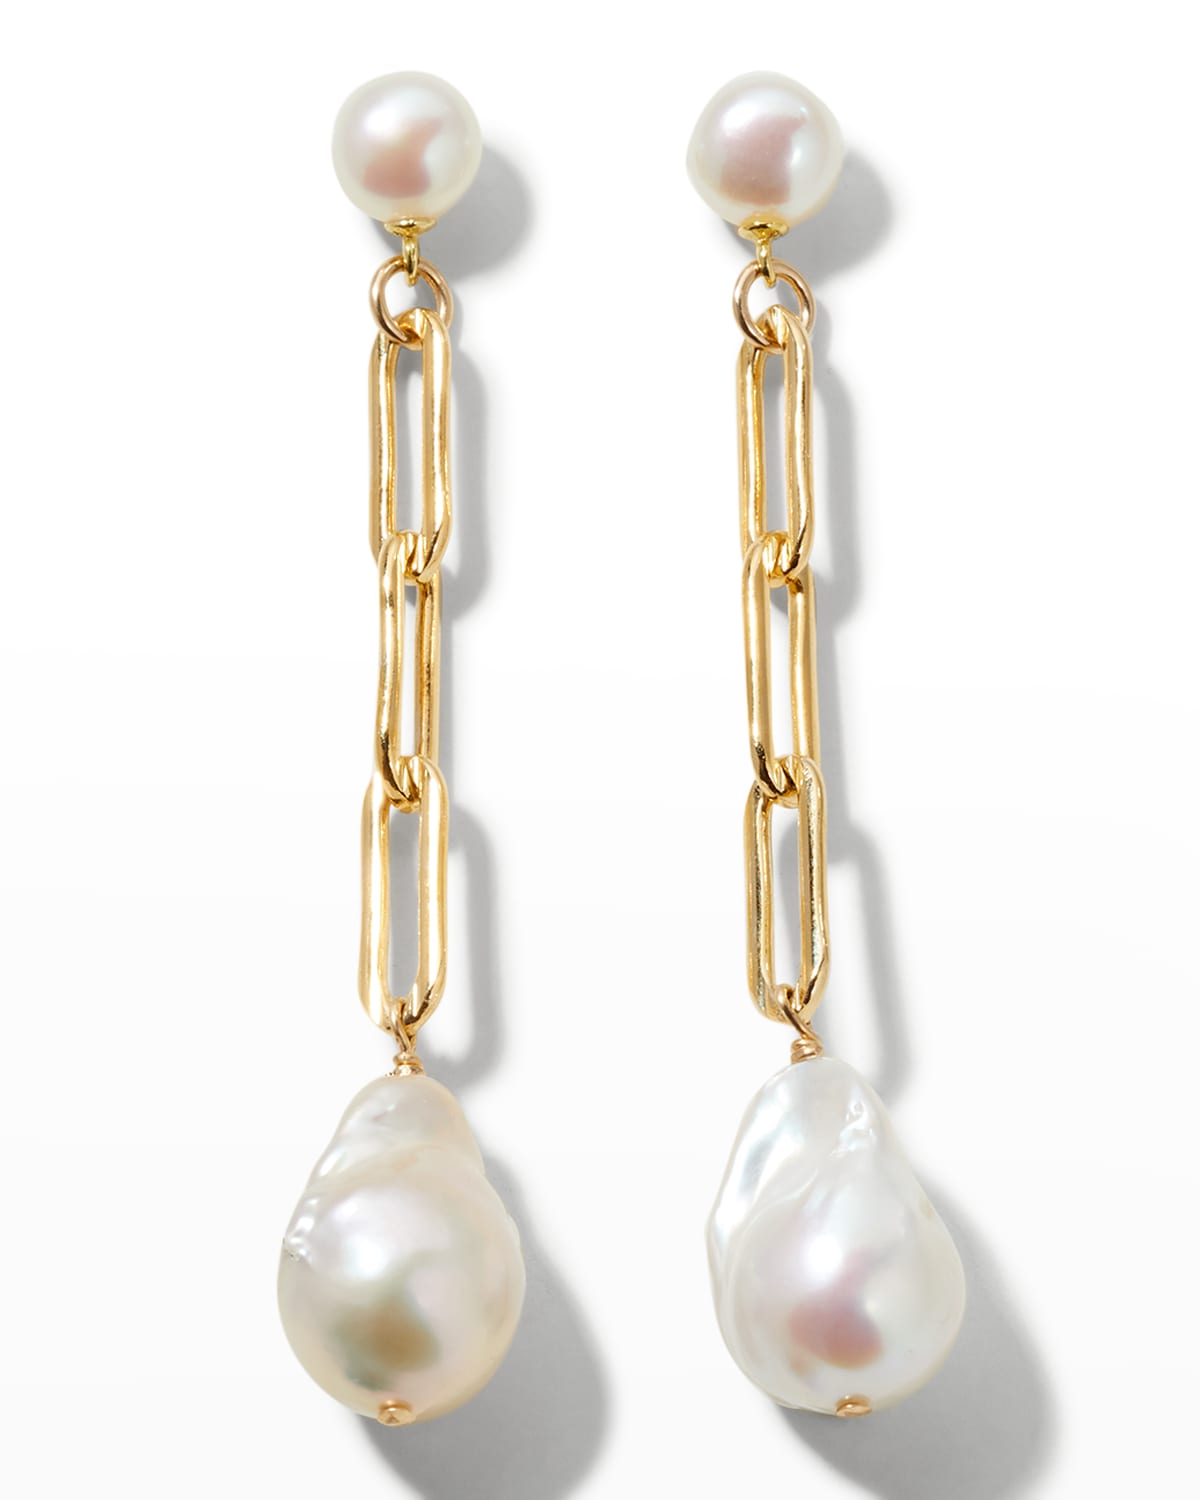 Baroque Pearl Drop Earrings with Paperclip Chain